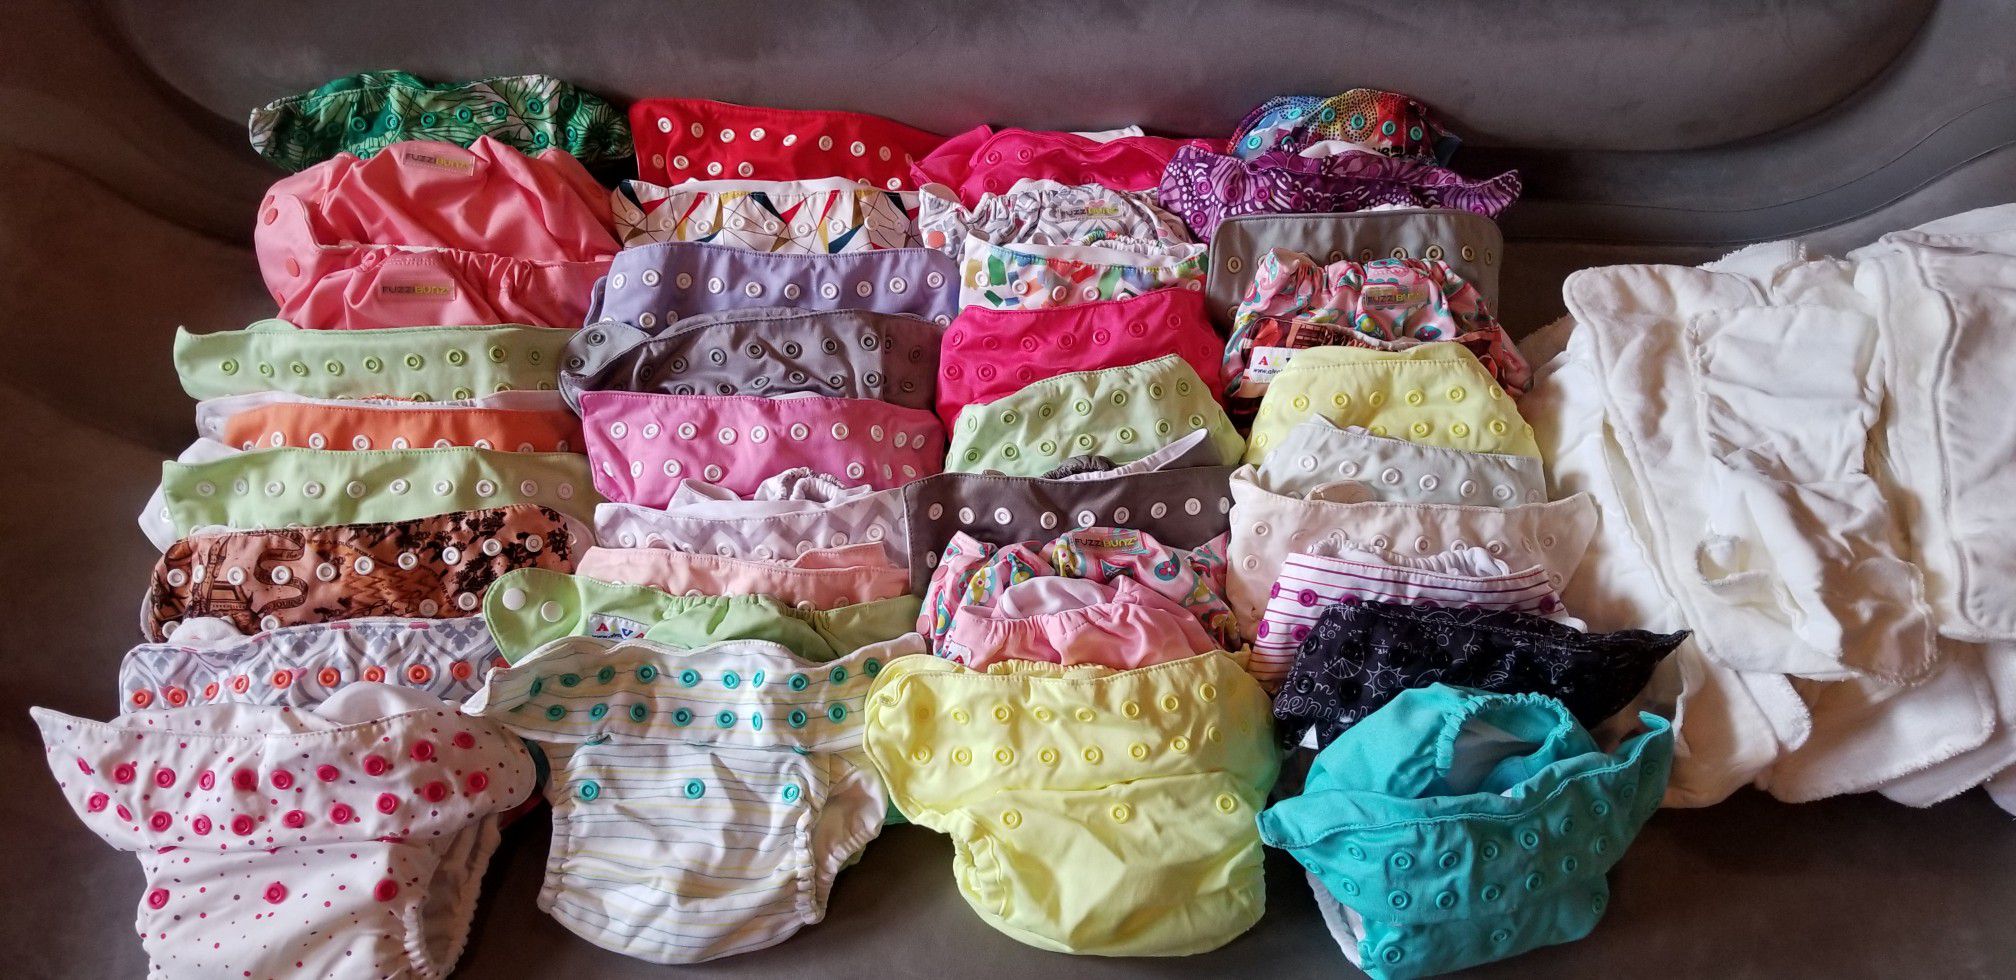 Cloth Diapers lot (Free)